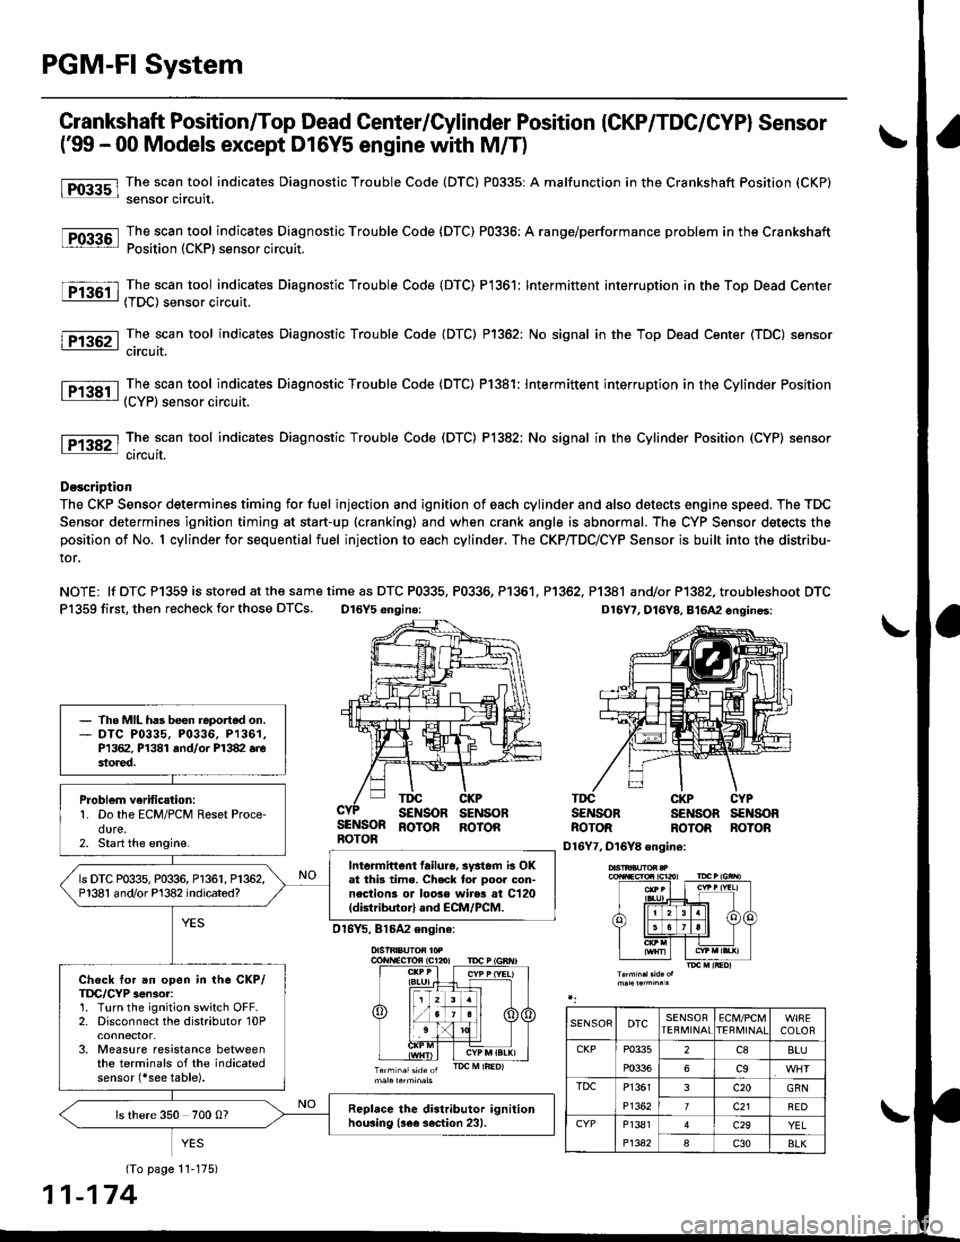 HONDA CIVIC 1999 6.G Repair Manual PGM-FI System
l-Fos3sl
tFos36l
tF1361 l
Fr362-1
tF13sil
Crankshaft Position/Top Dead Center/Cylinder Position (CKP/TDC/CYPI Sensor
f99 - 00 Models except D16Y5 engine with M/T)
The scan tool indicates